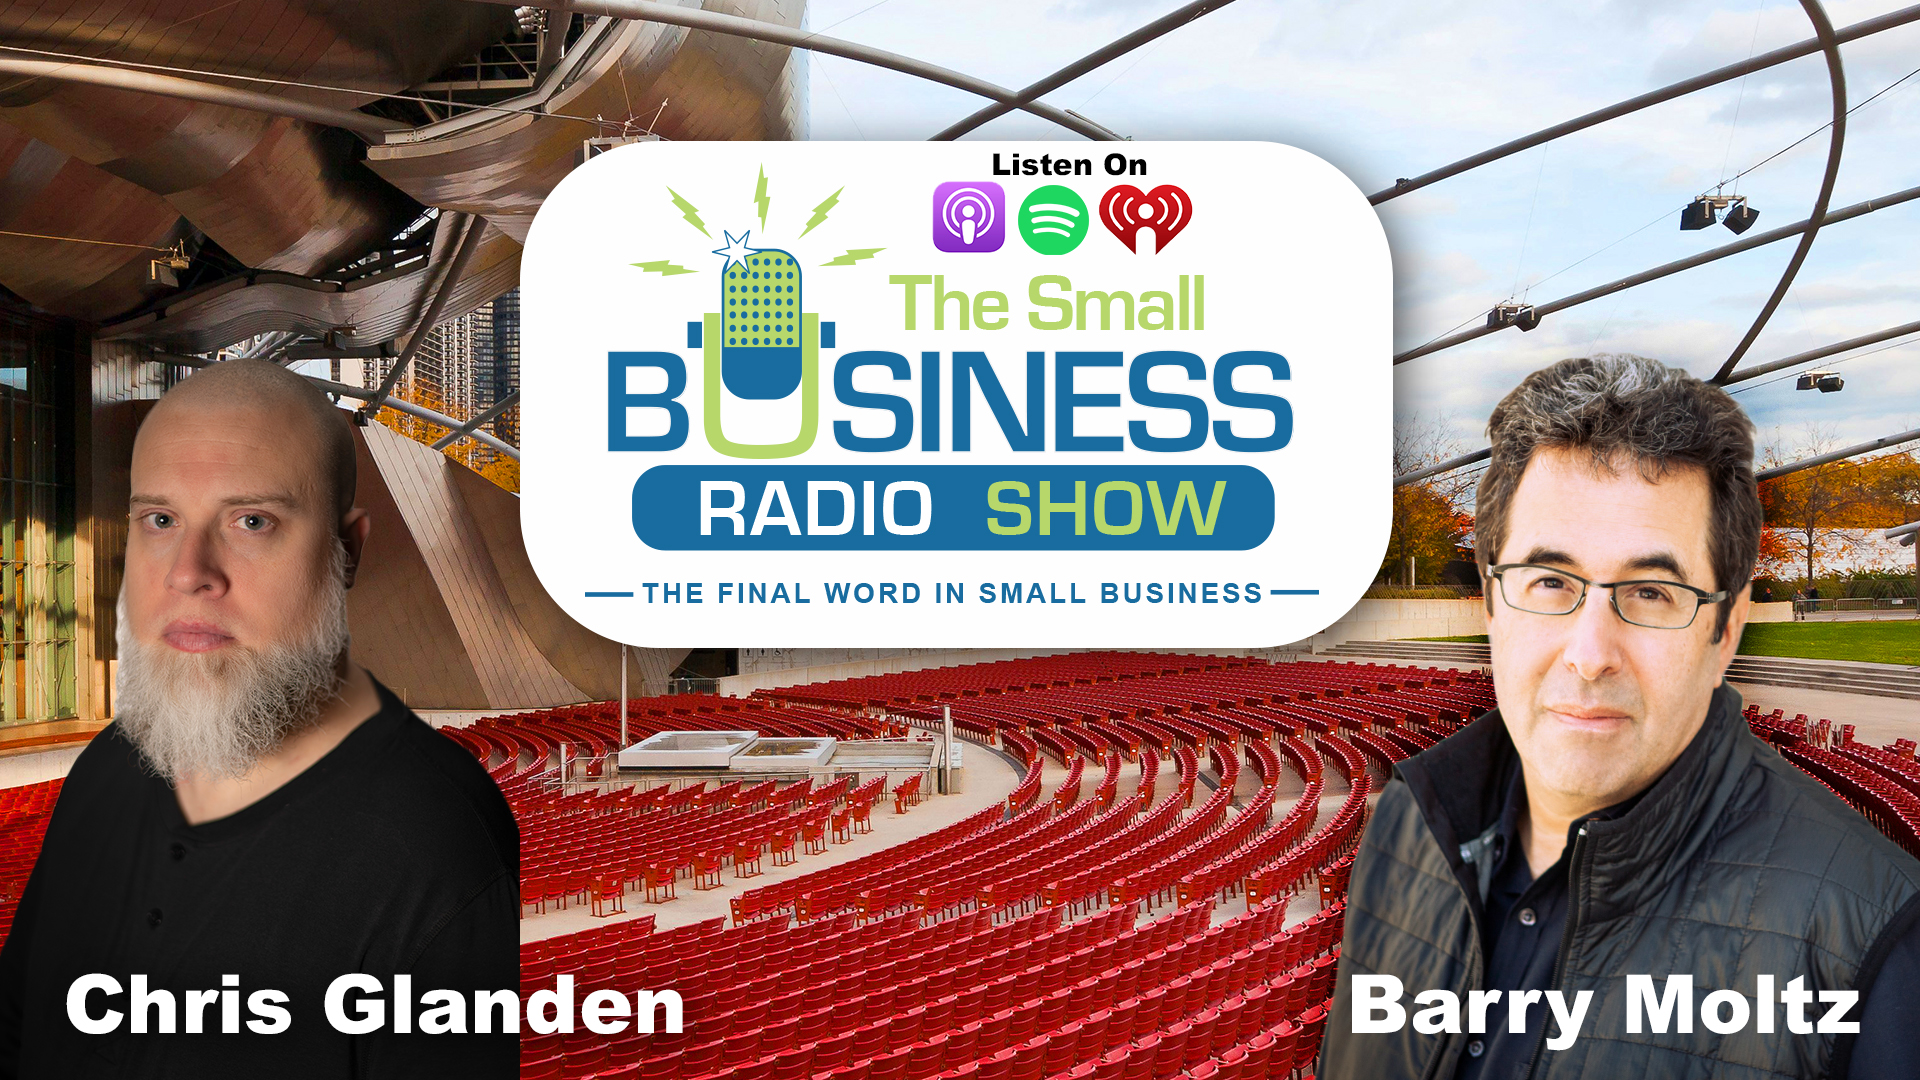 Chris Glanden on The Small Business Radio Show